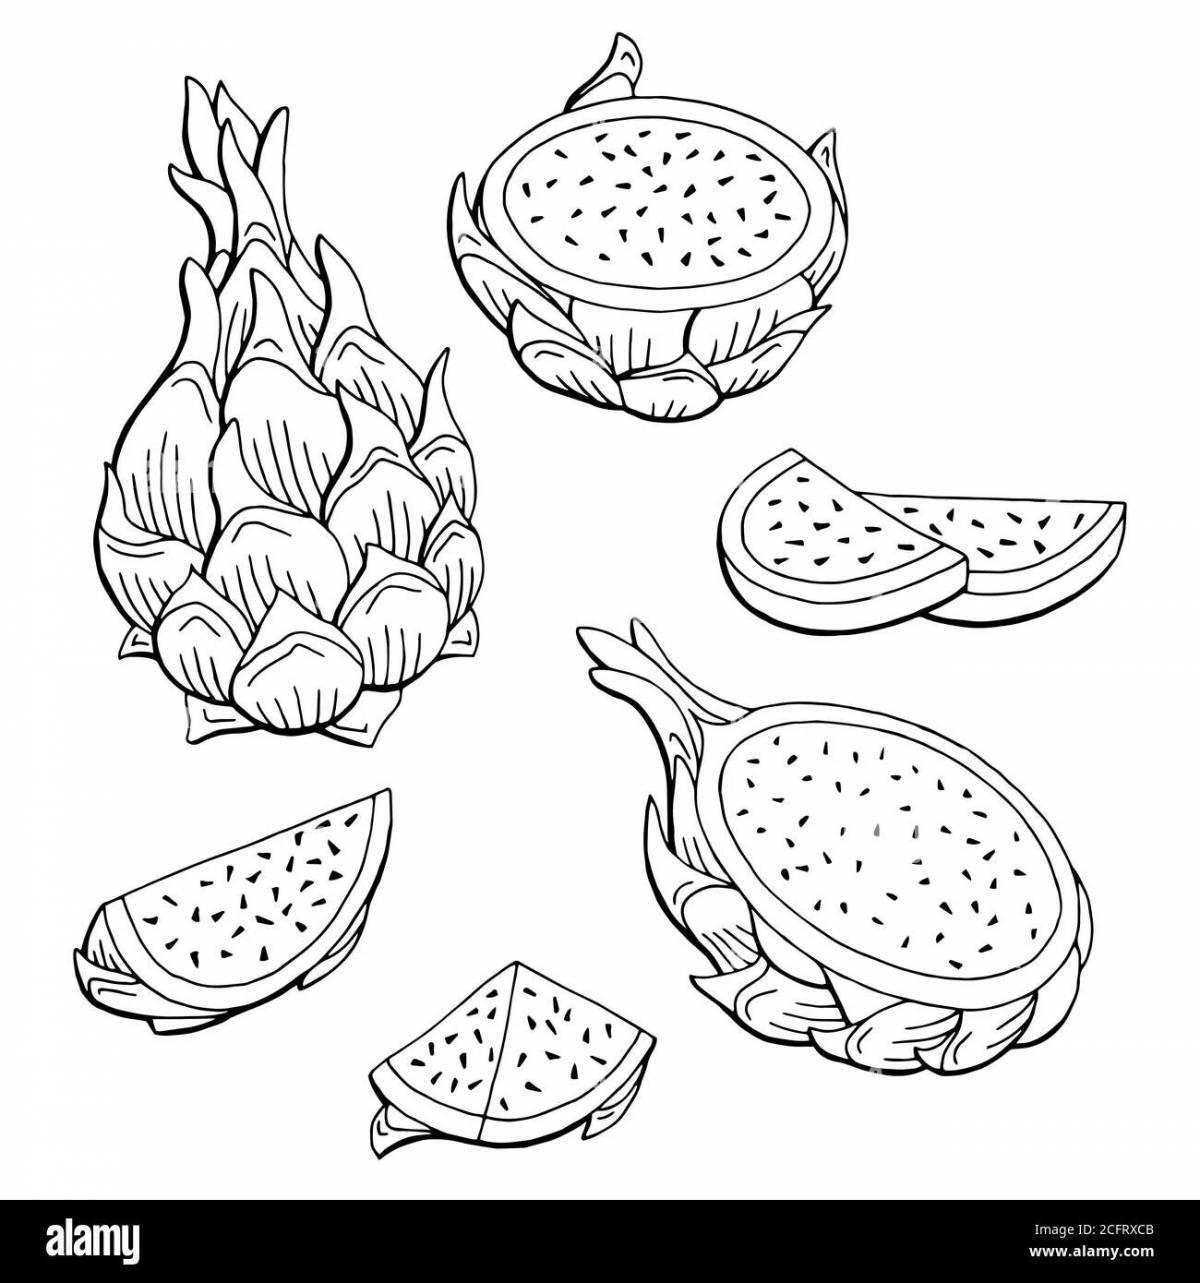 Live dragon fruit coloring page